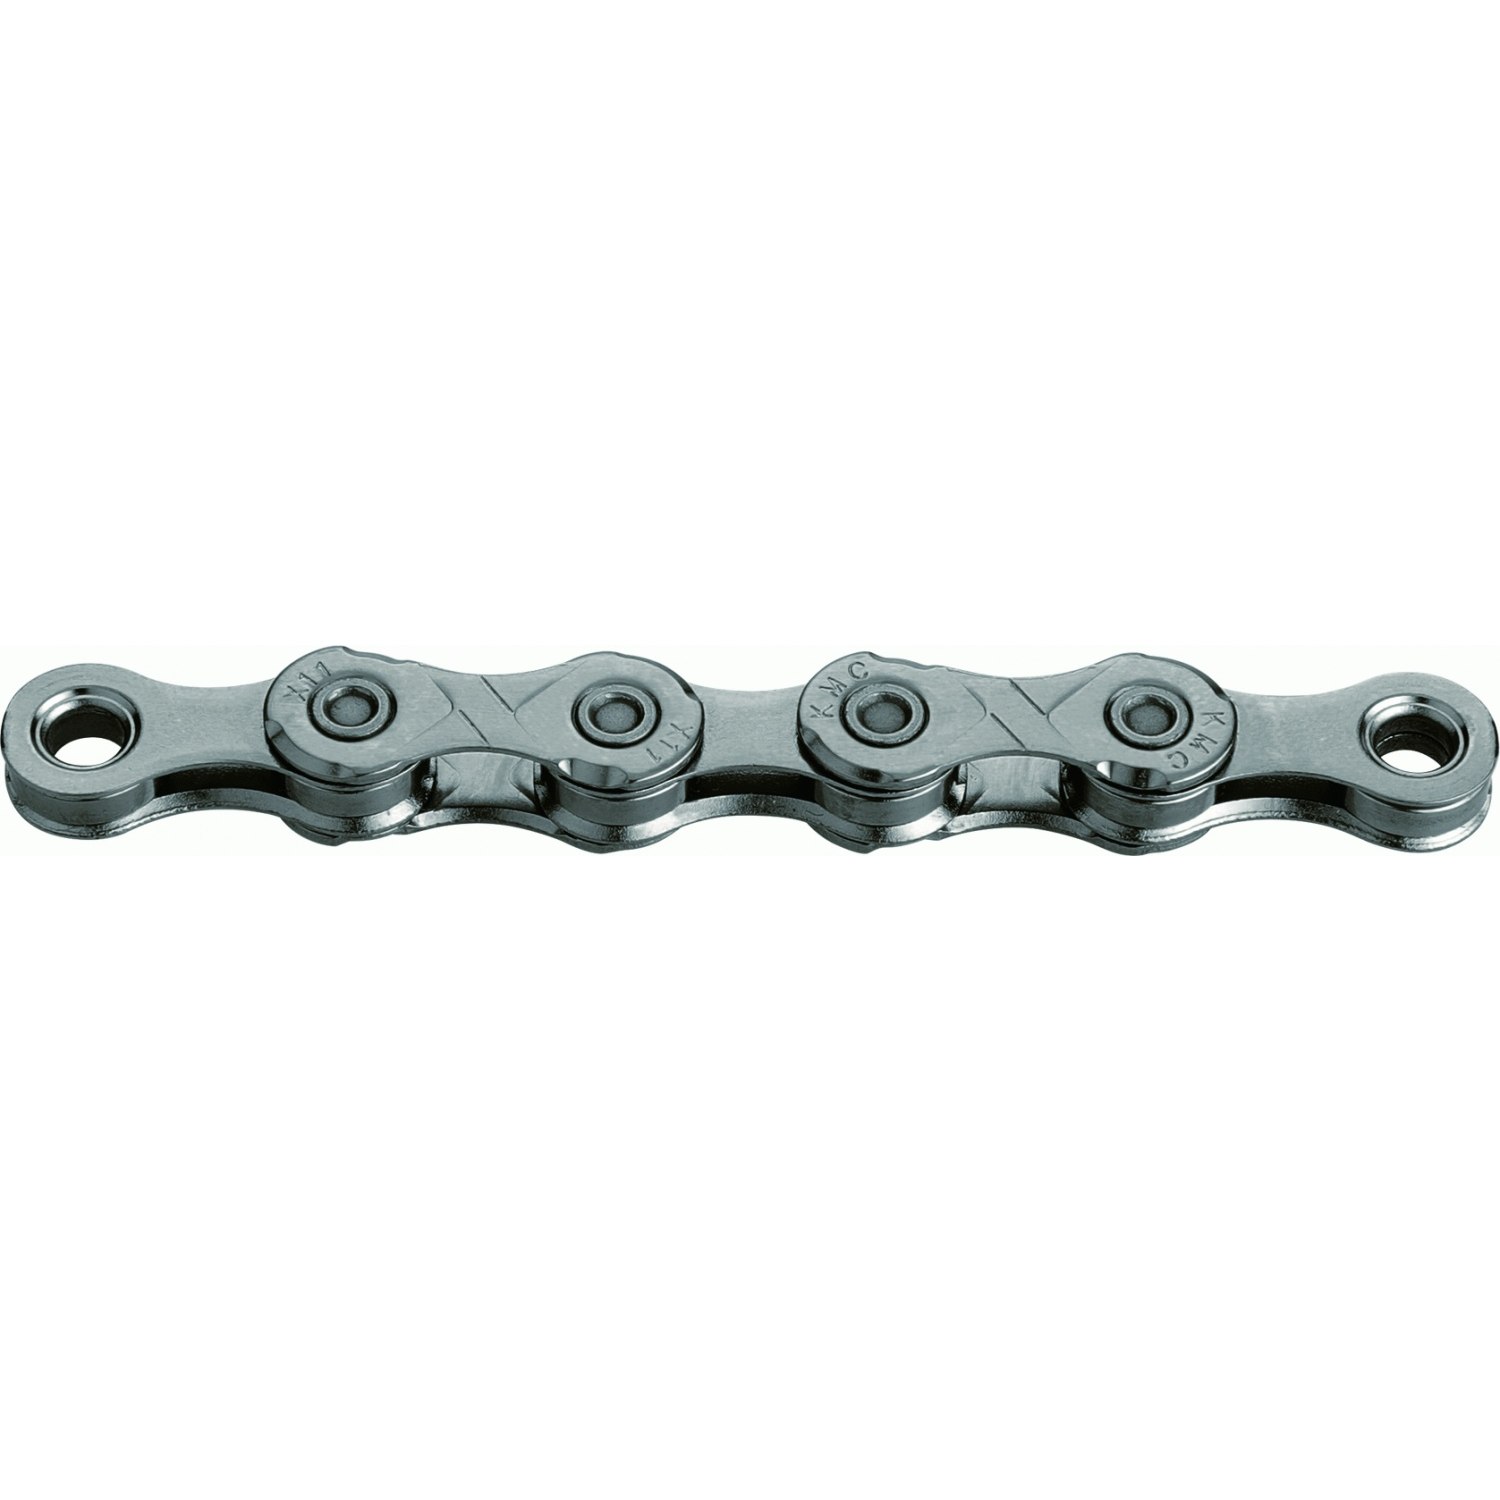 Picture of KMC X11R Chain - 11-speed - grey